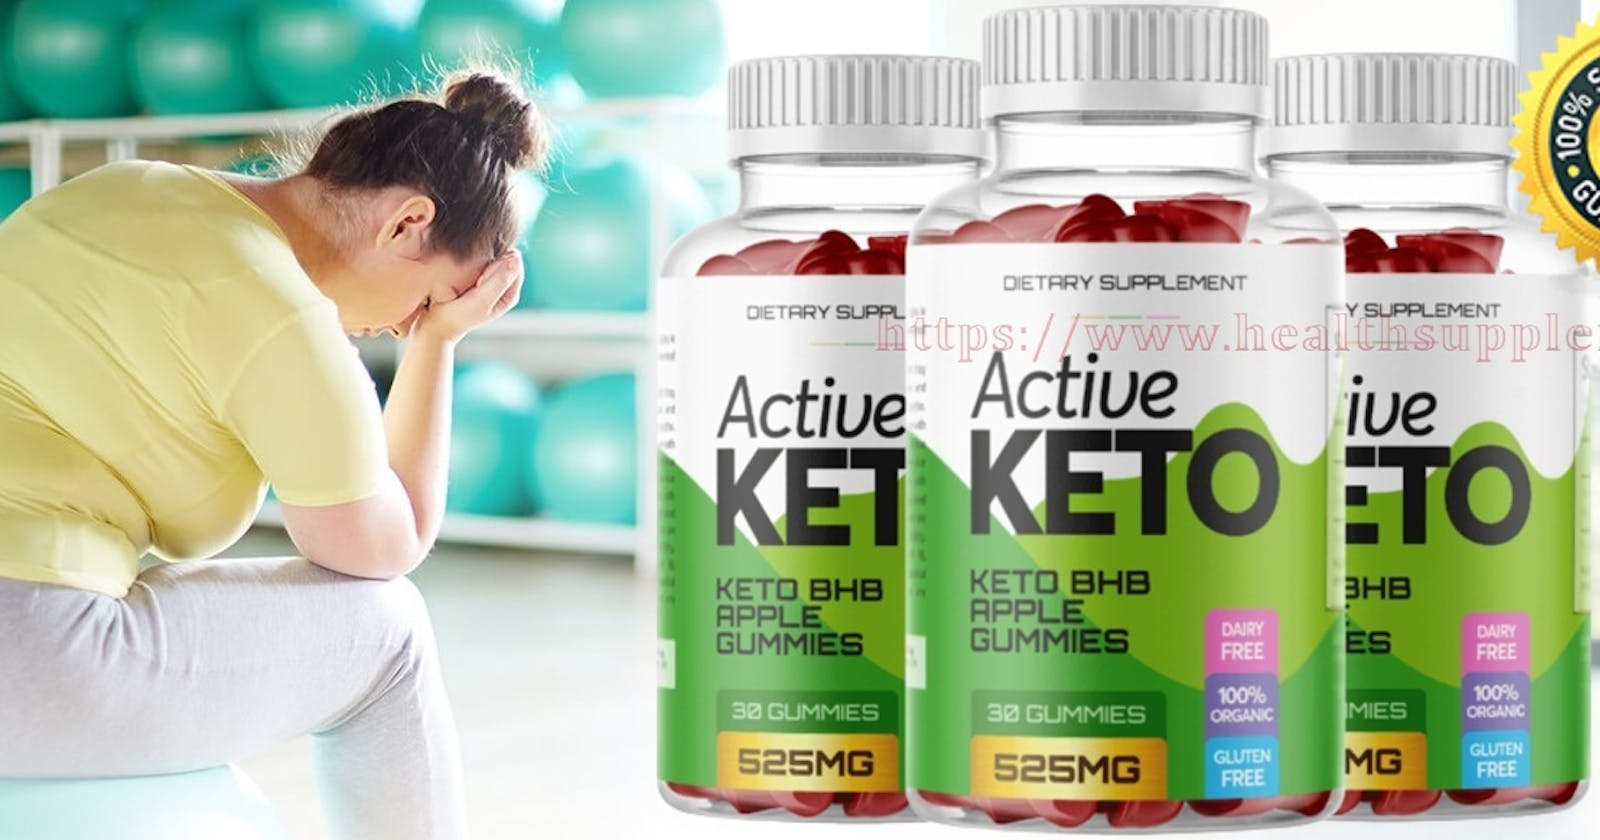 Active Keto Gummies {Clinically Proven} Loss Body Weight And Fat Without Following Hard Diet Or Exercise(Spam Or Legit)